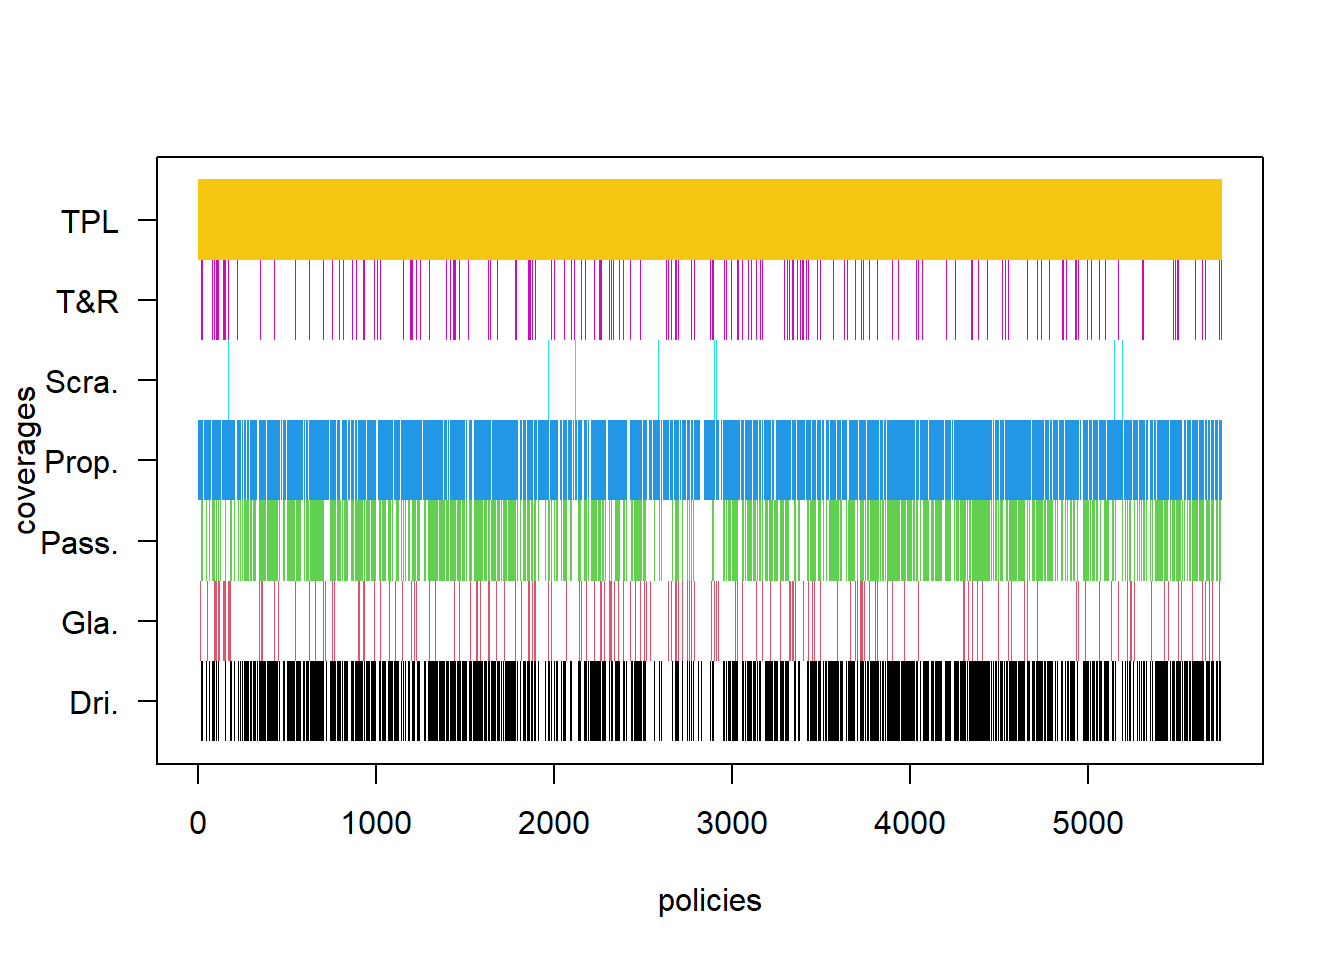 The distribution of coverages across the policies.